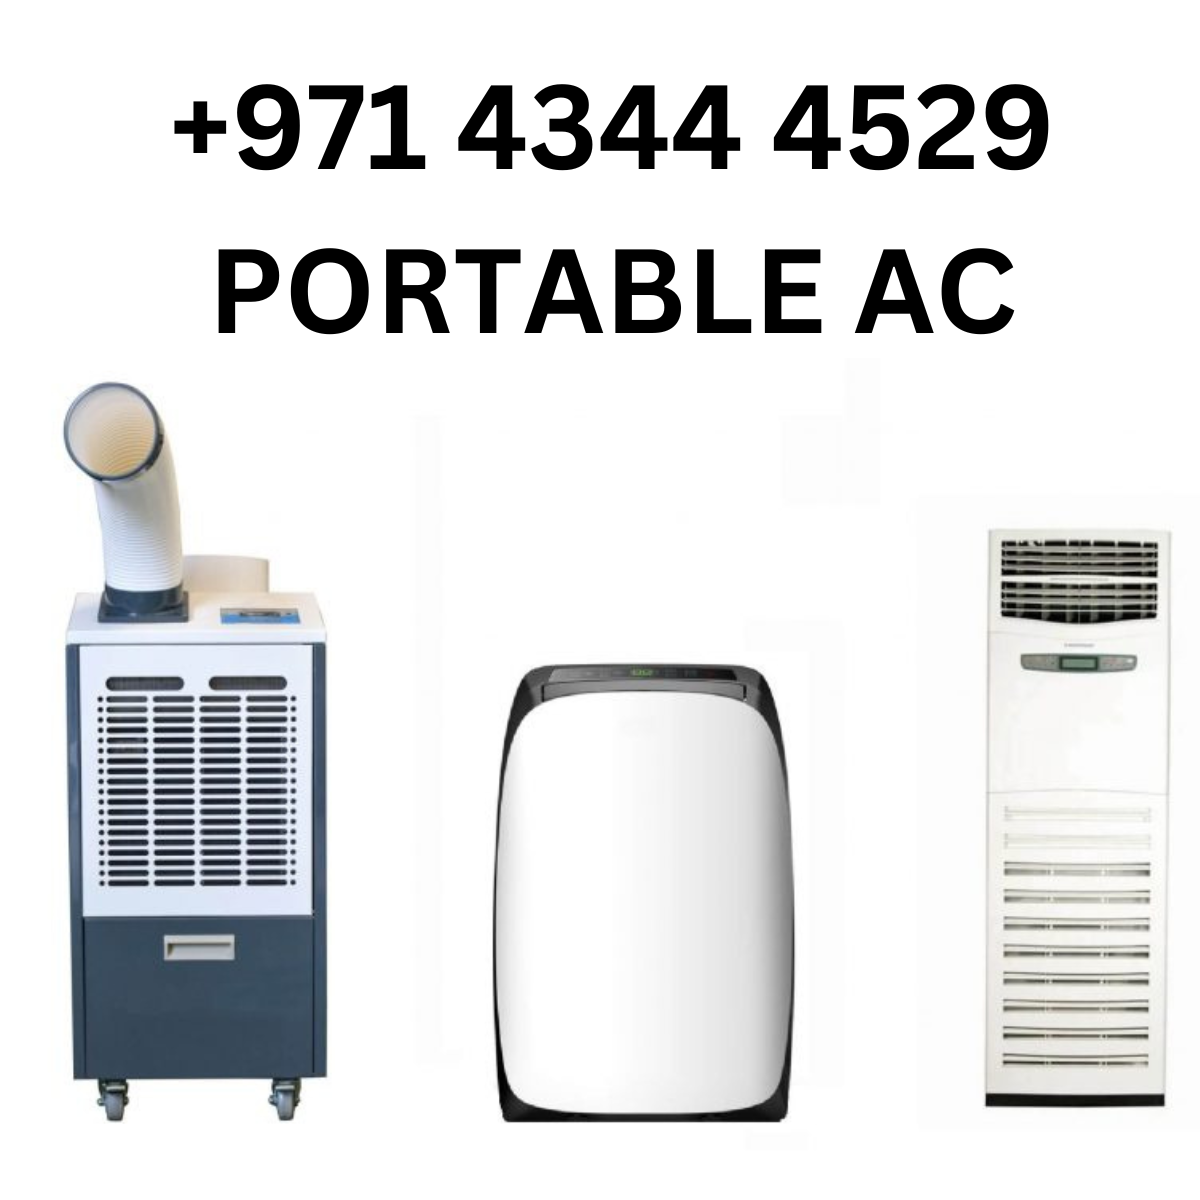 For rental and sale portable air conditioner